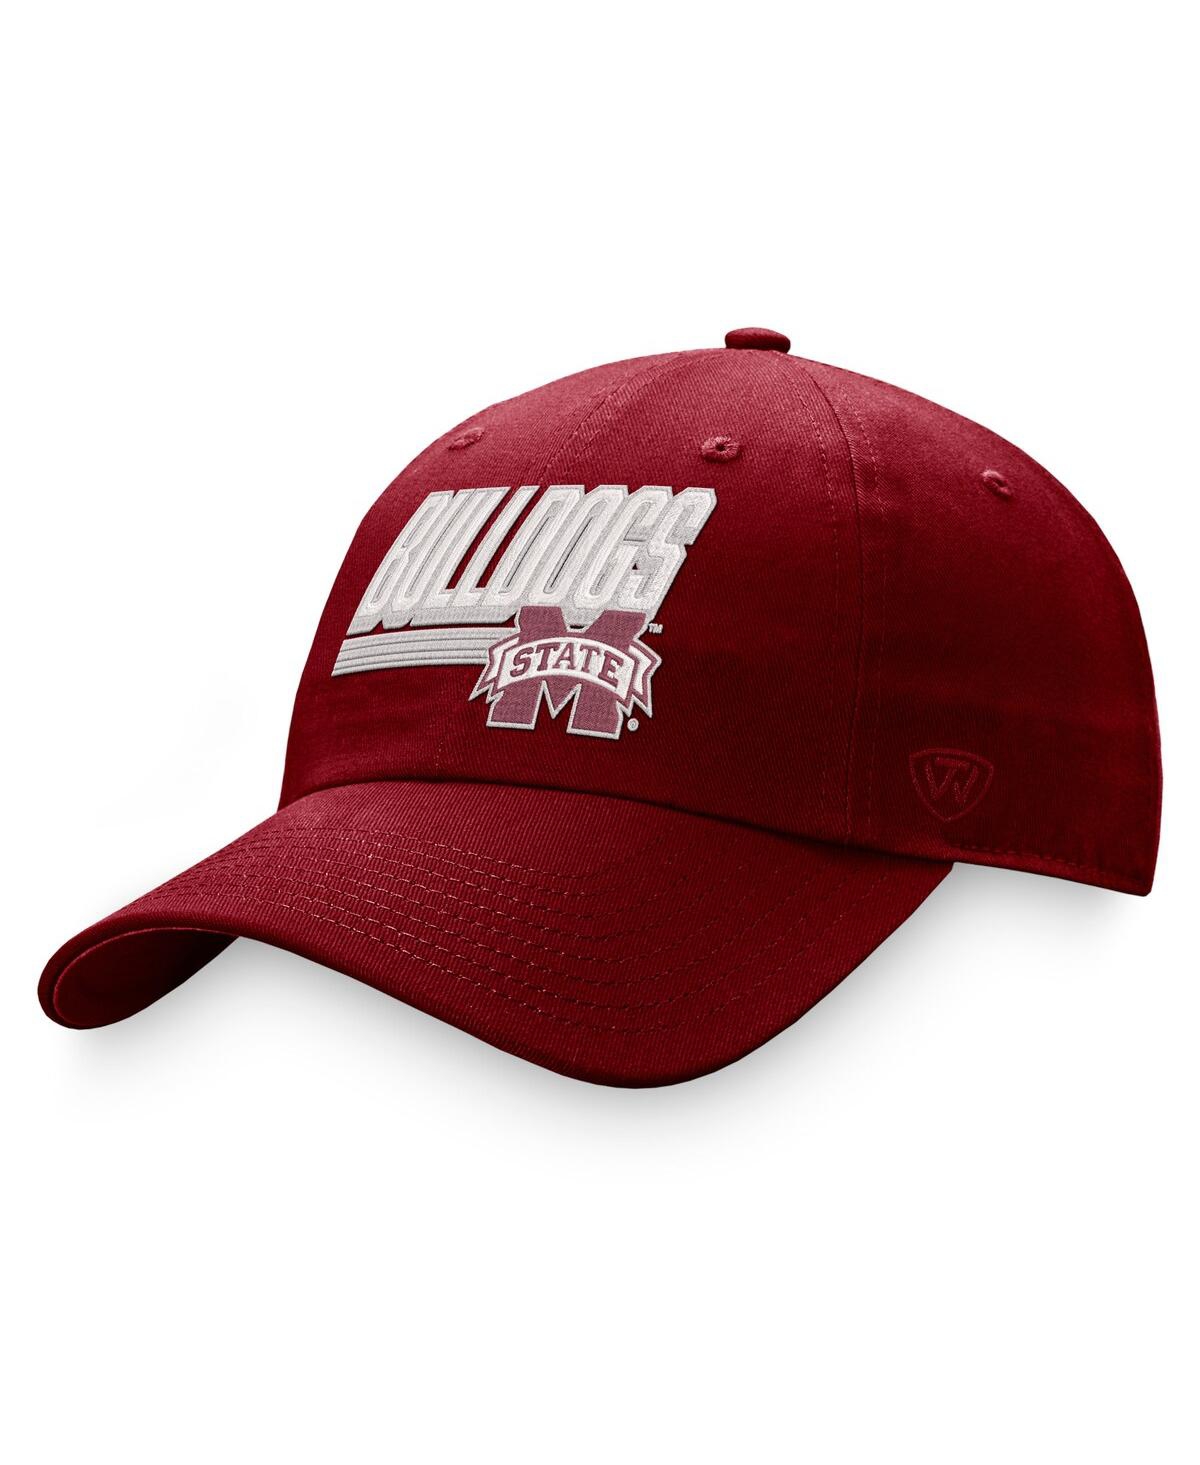 Men's Top of the World Maroon Mississippi State Bulldogs Slice Adjustable Hat - Maroon